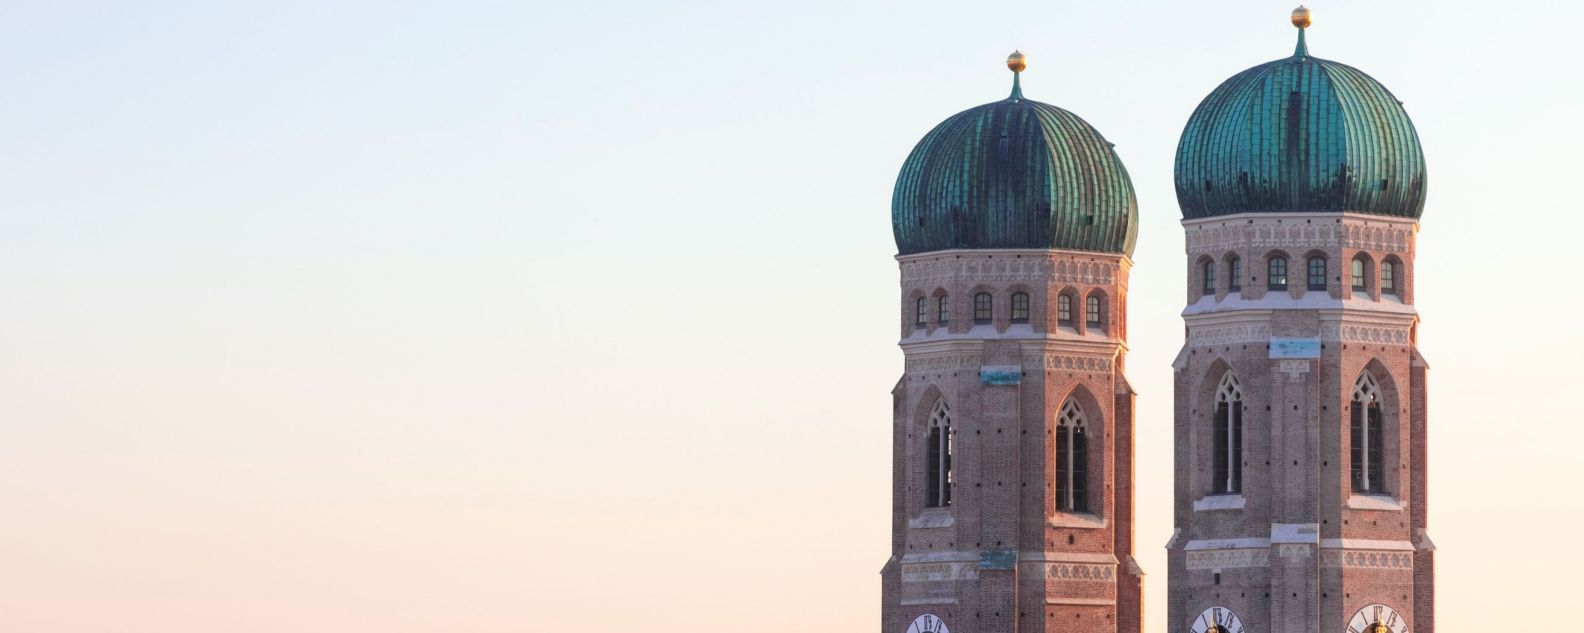 view of the twin domes of the Frauenkirche church in Munich, Germany